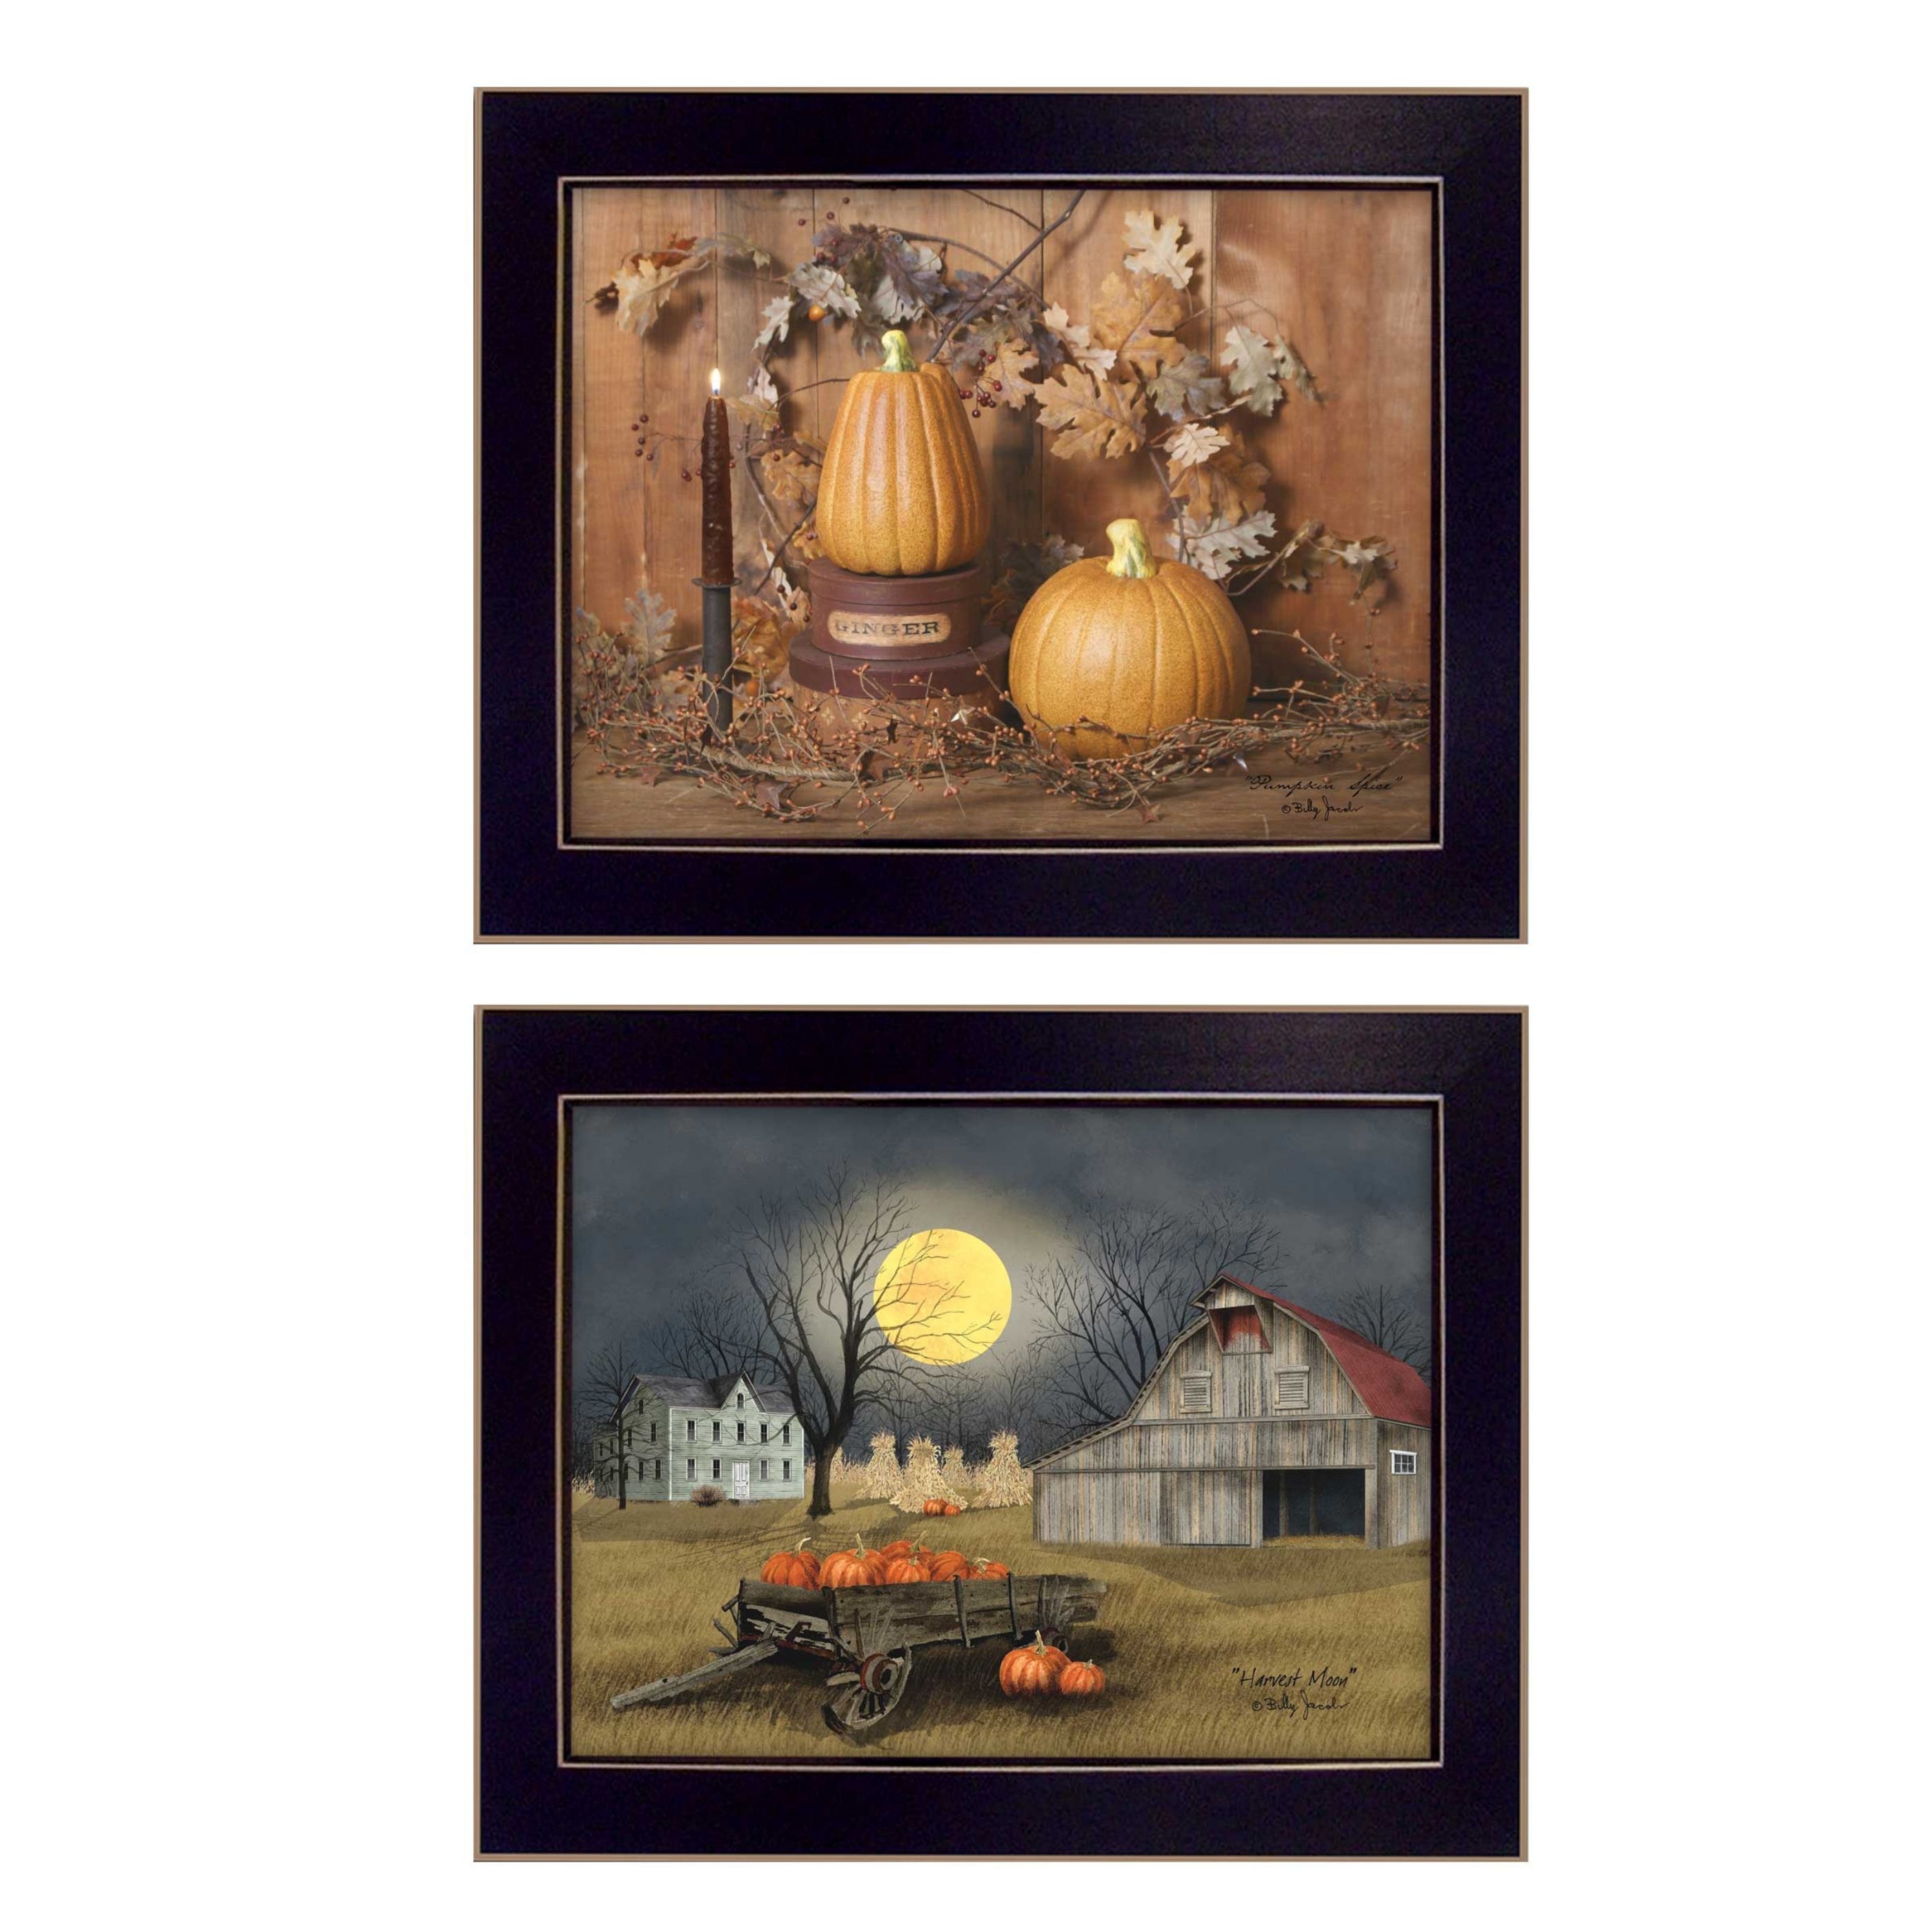 "Pumpkin Space Harvest Collection" 2-Piece Vignette By Billy Jacobs, Printed Wall Art, Ready To Hang Framed Poster, Black Frame